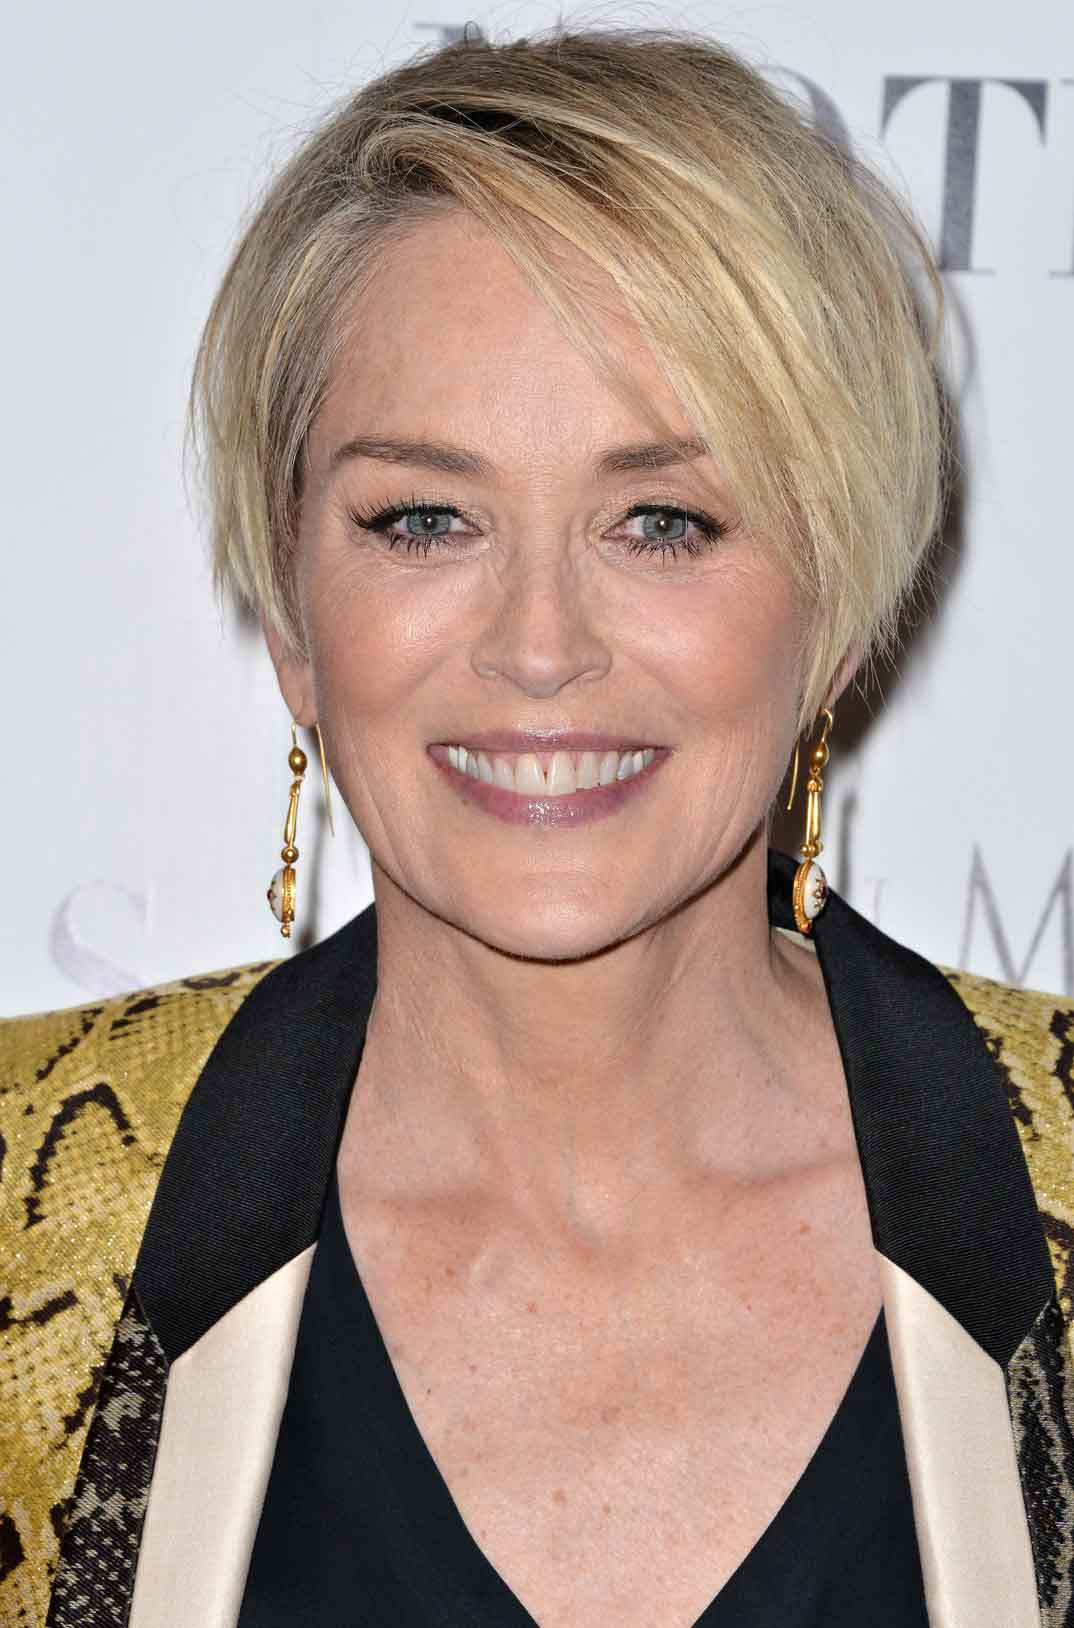 sharon stone, premiere, mothers and daughters